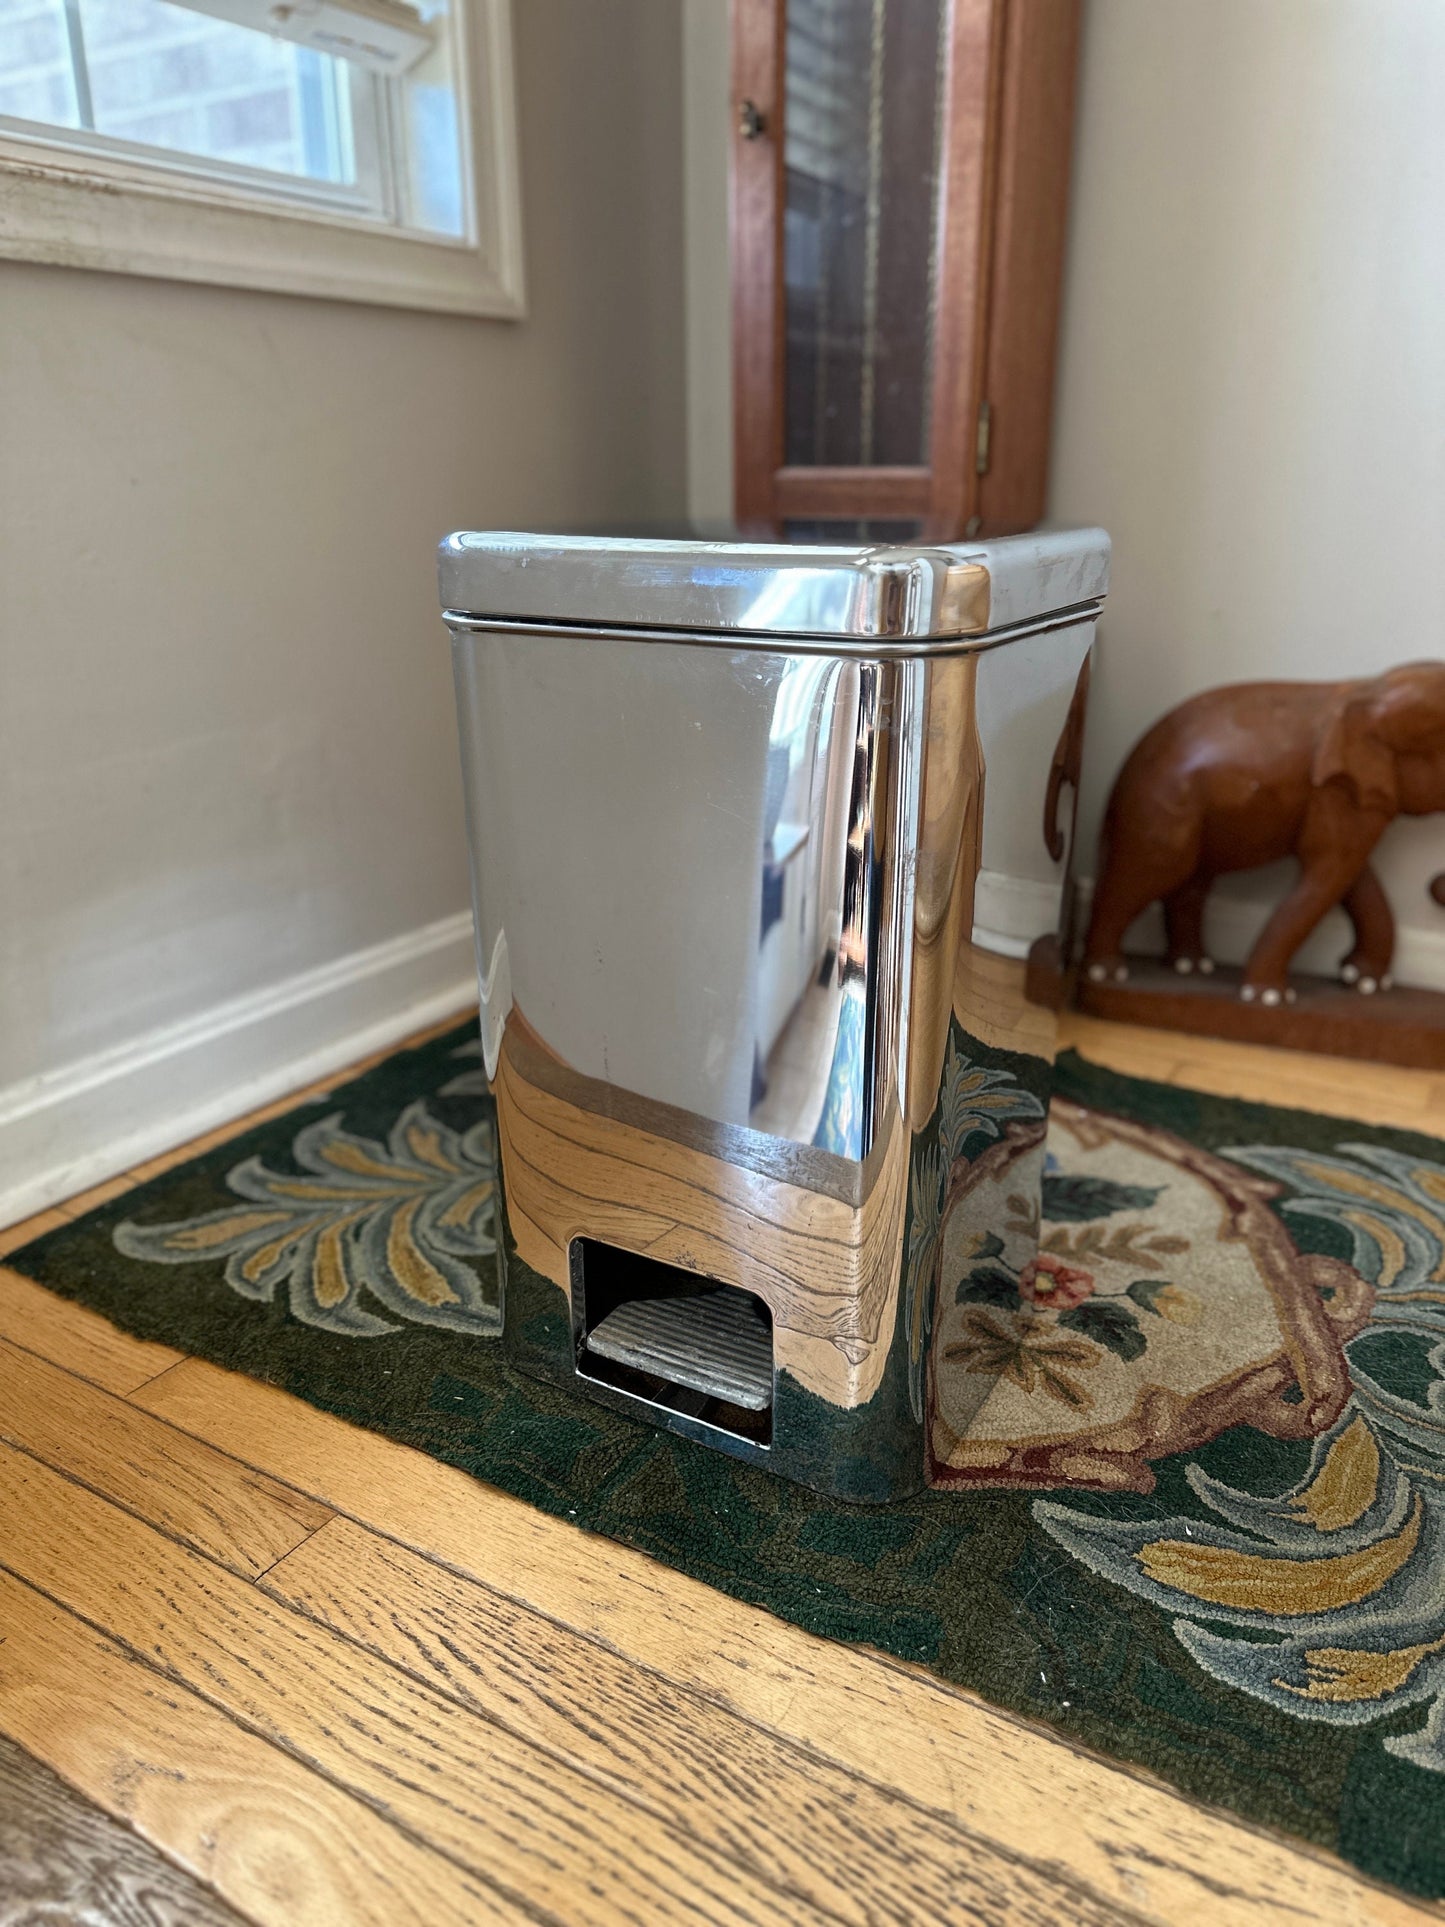 Chrome, Garbage Can, Step on, Retro, Mid Century Modern, Kitchen, MCM, Vintage, Trash can, Waste Can